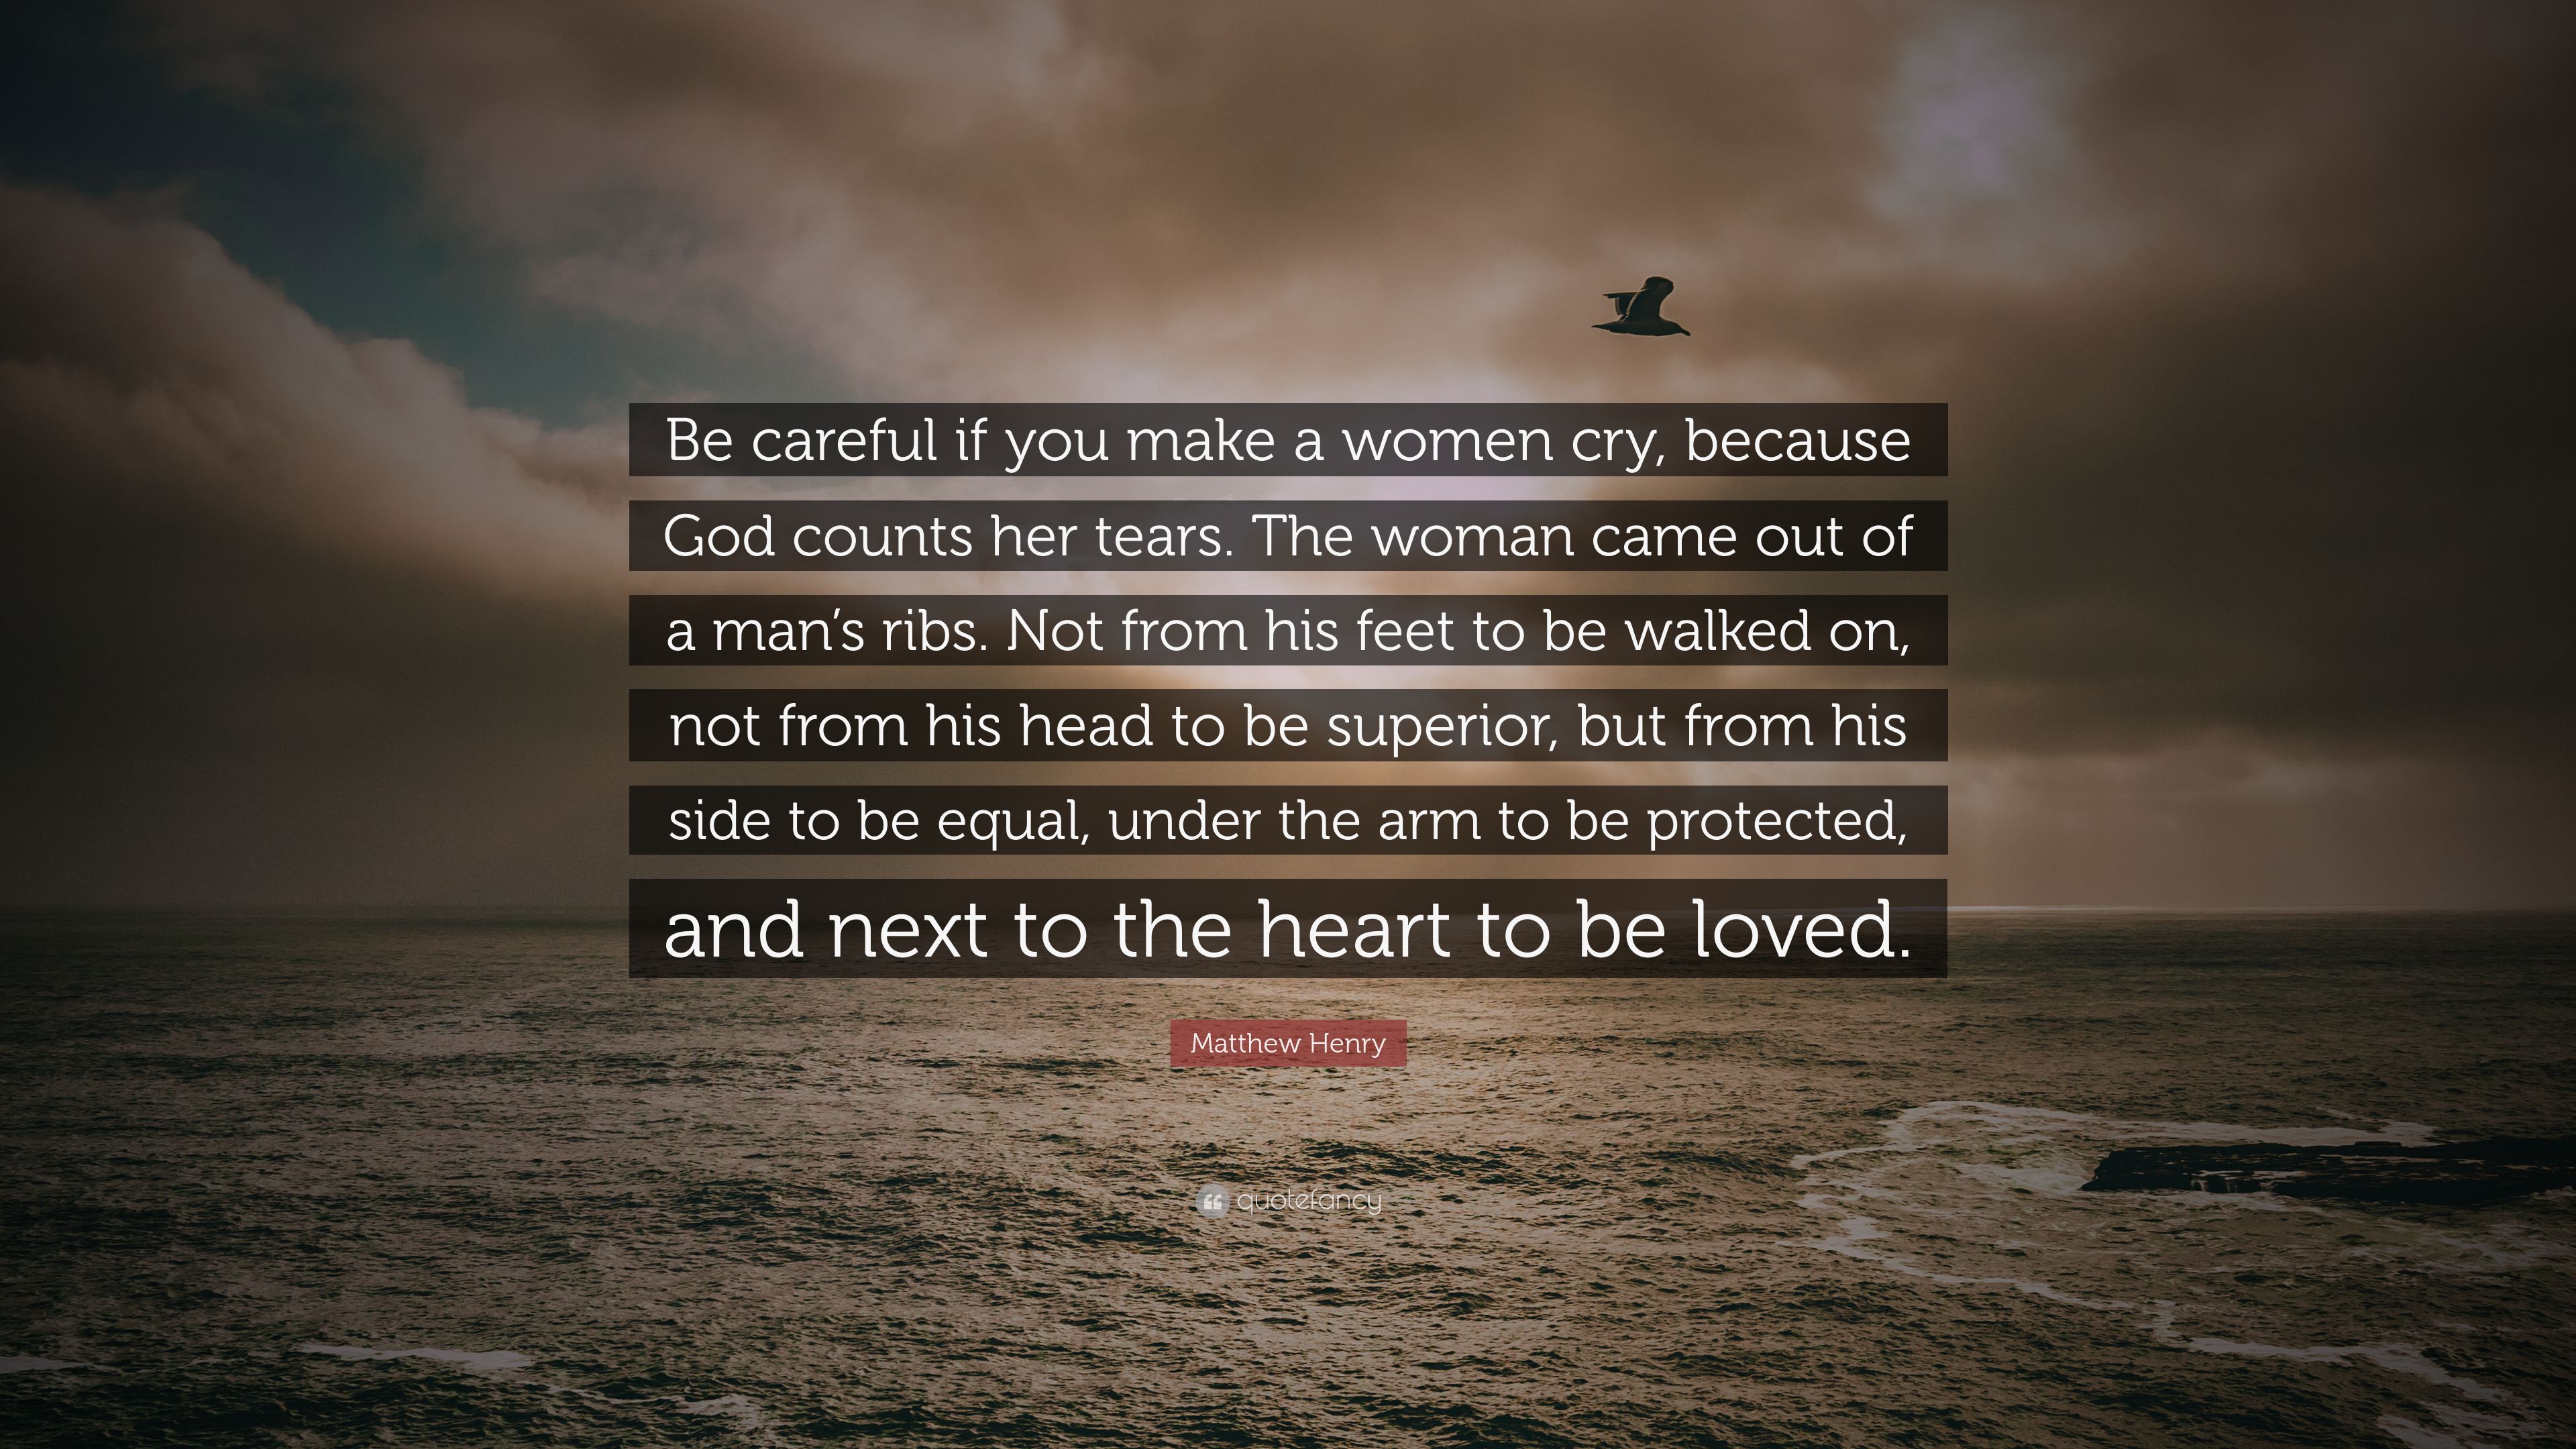 Matthew Henry Quote: “Be careful if you make a women cry, because